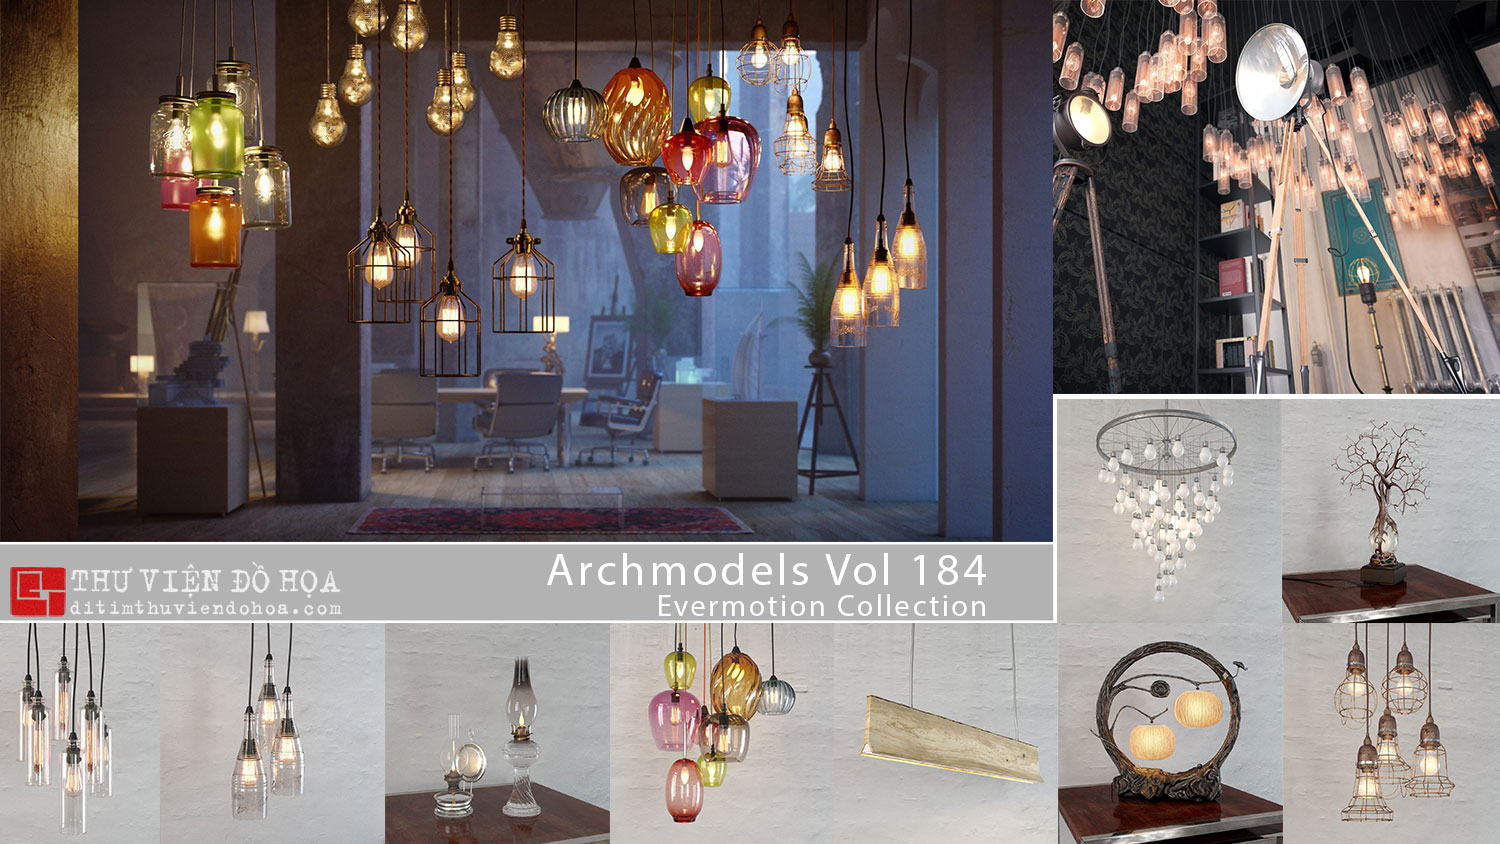 Evermotion Archmodels Vol 184